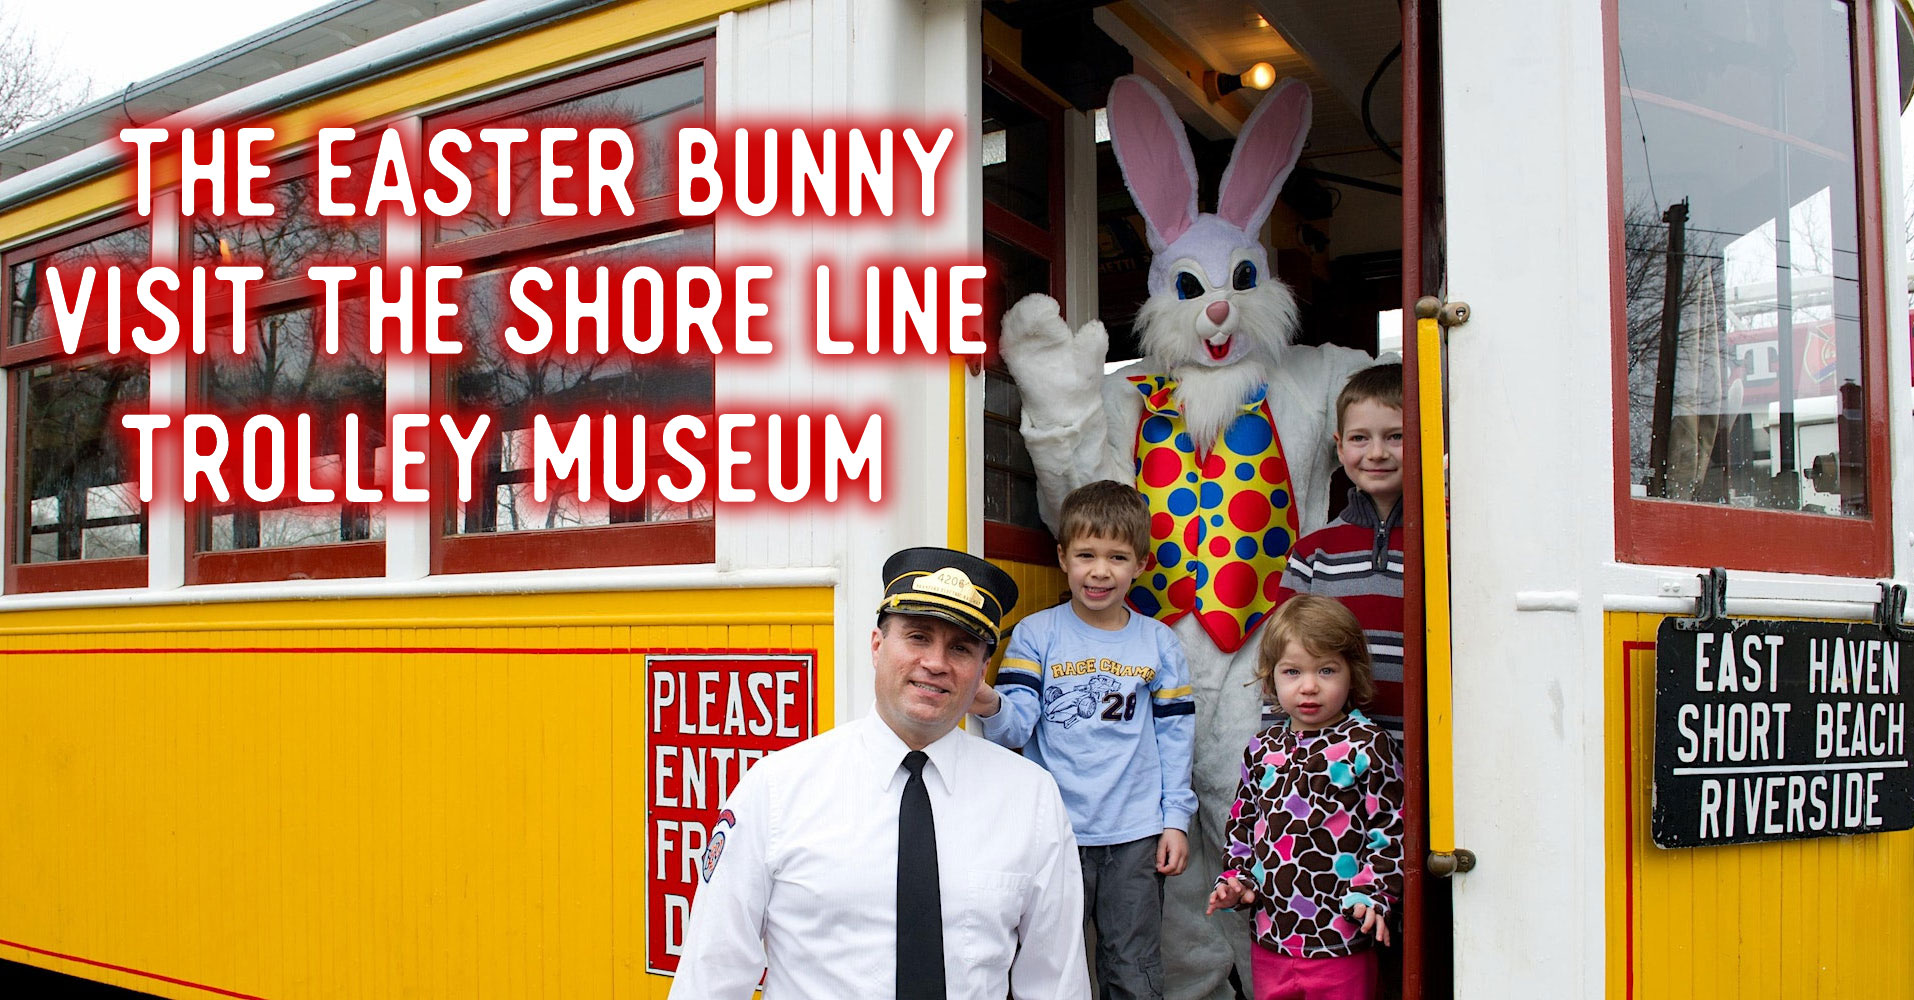 The Easter Bunny Visits The Shore Line Trolley Museum